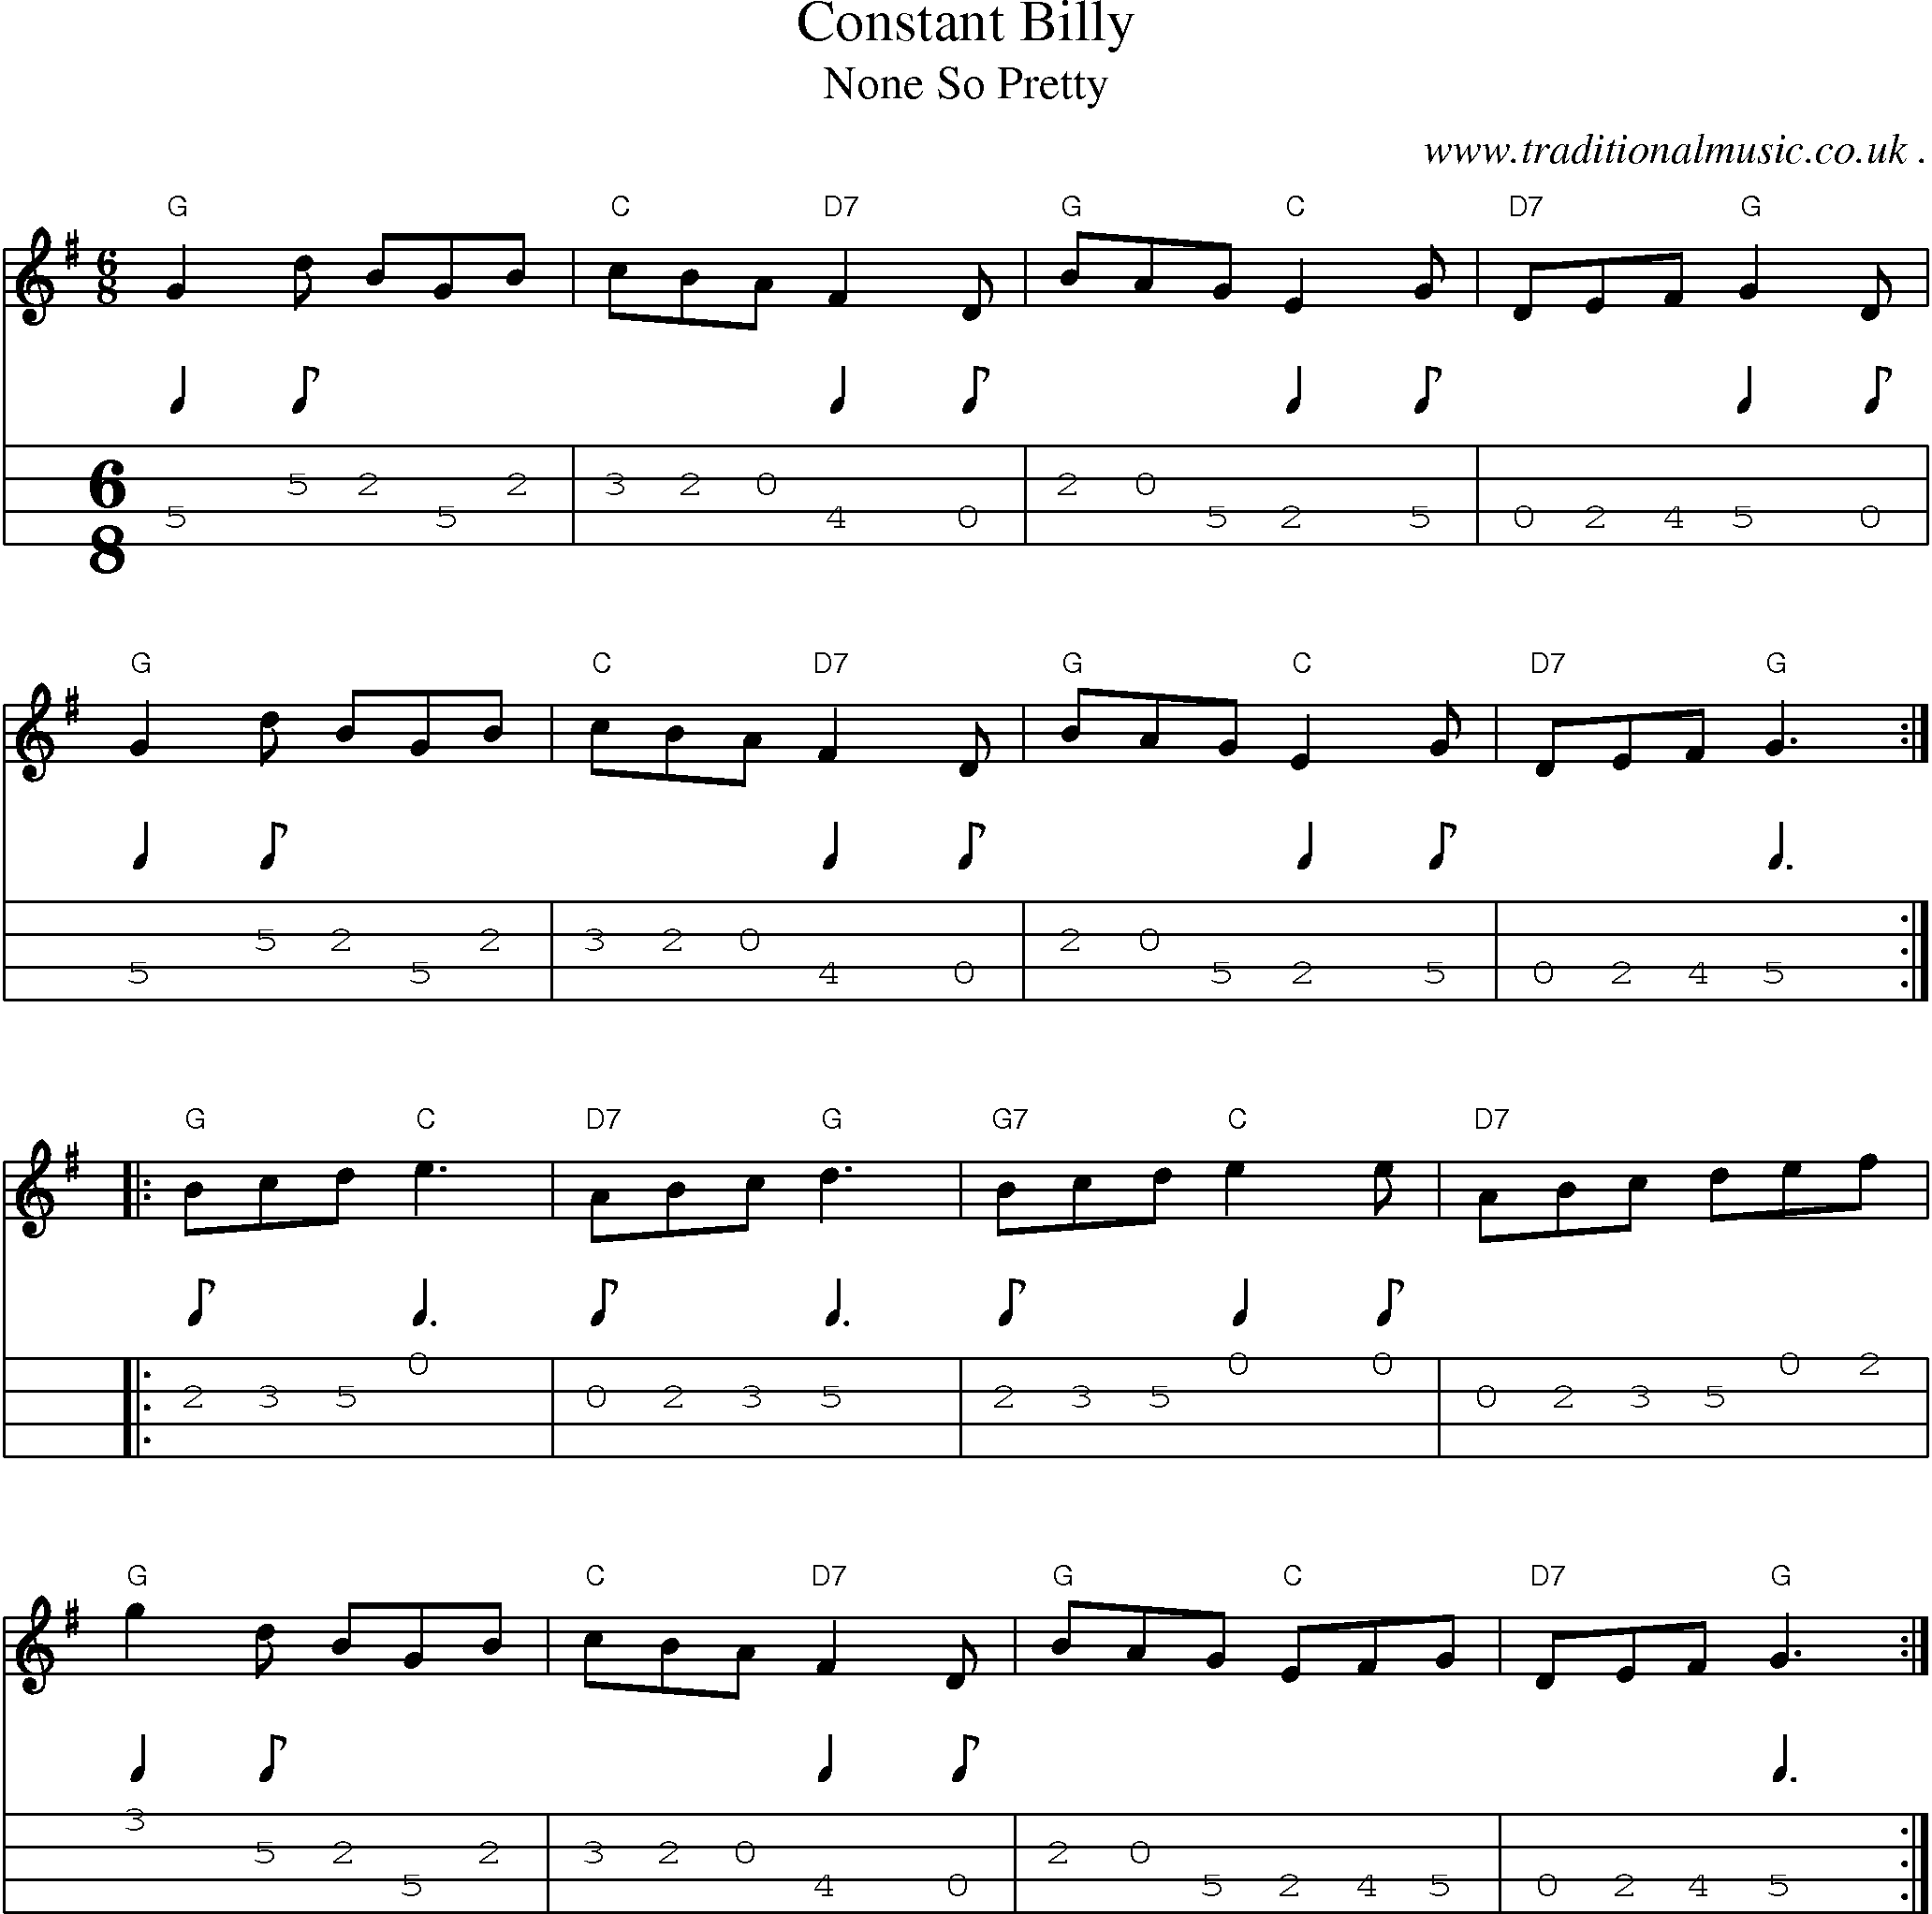 Music Score and Guitar Tabs for Constant Billy